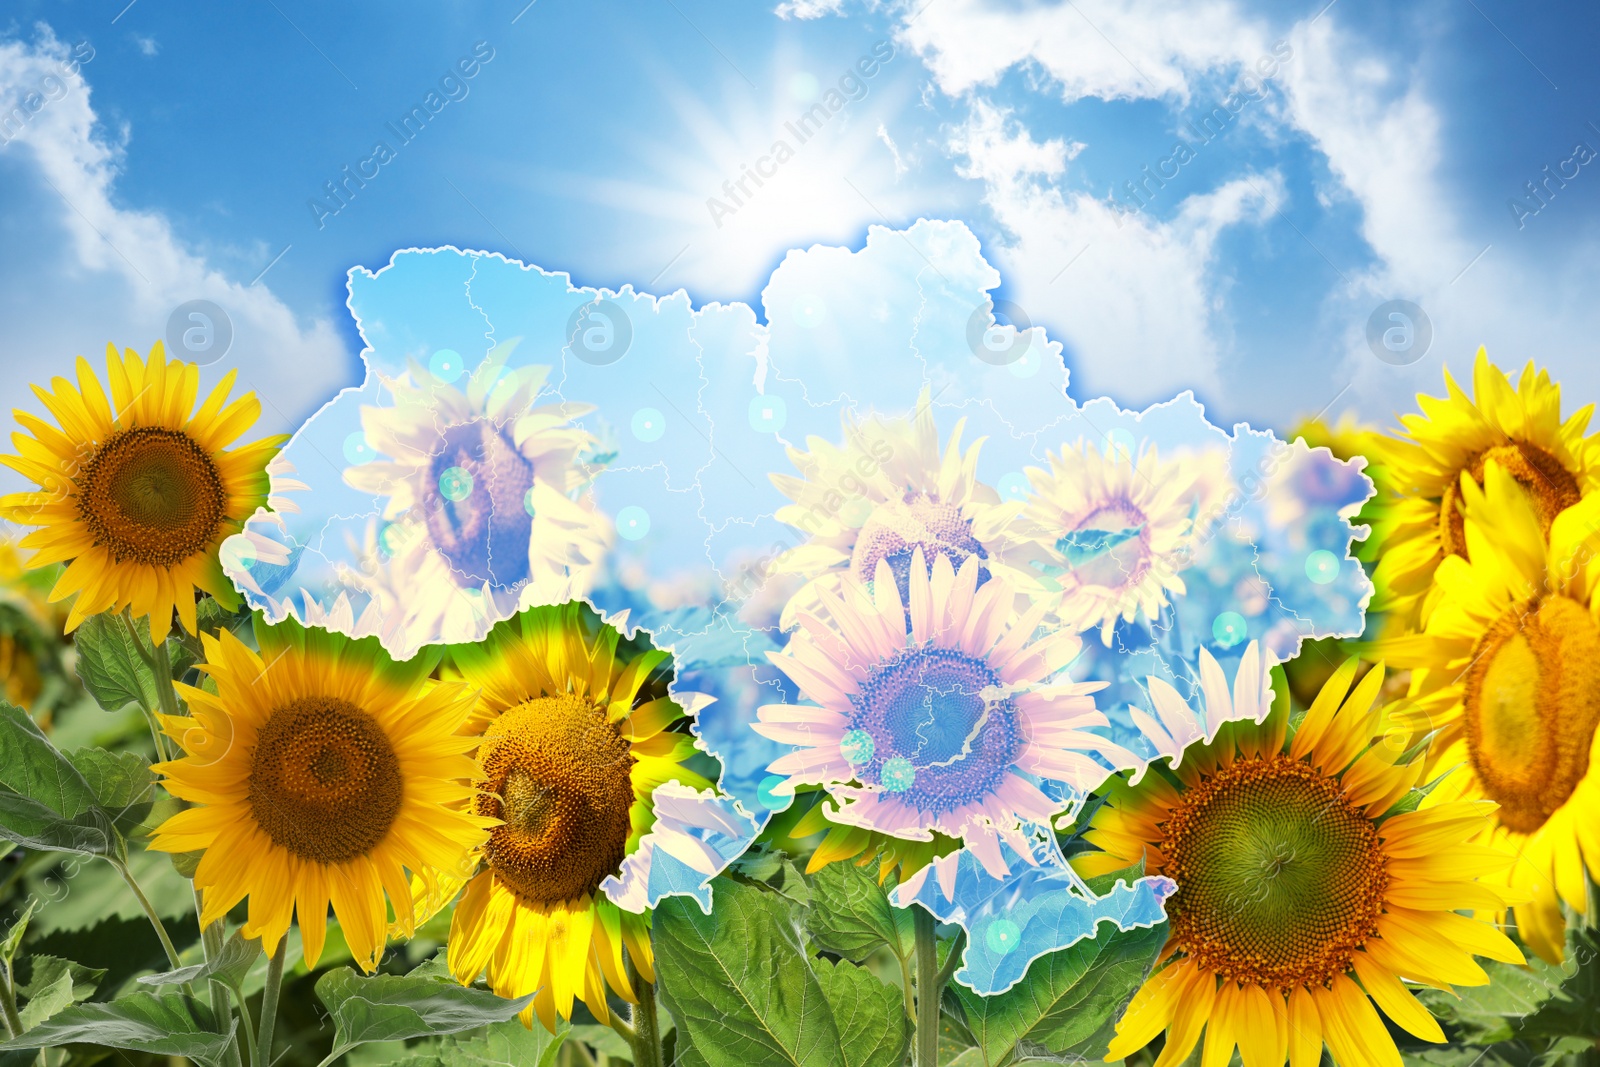 Image of Outline of Ukraine and sunflower field under blue sky on background